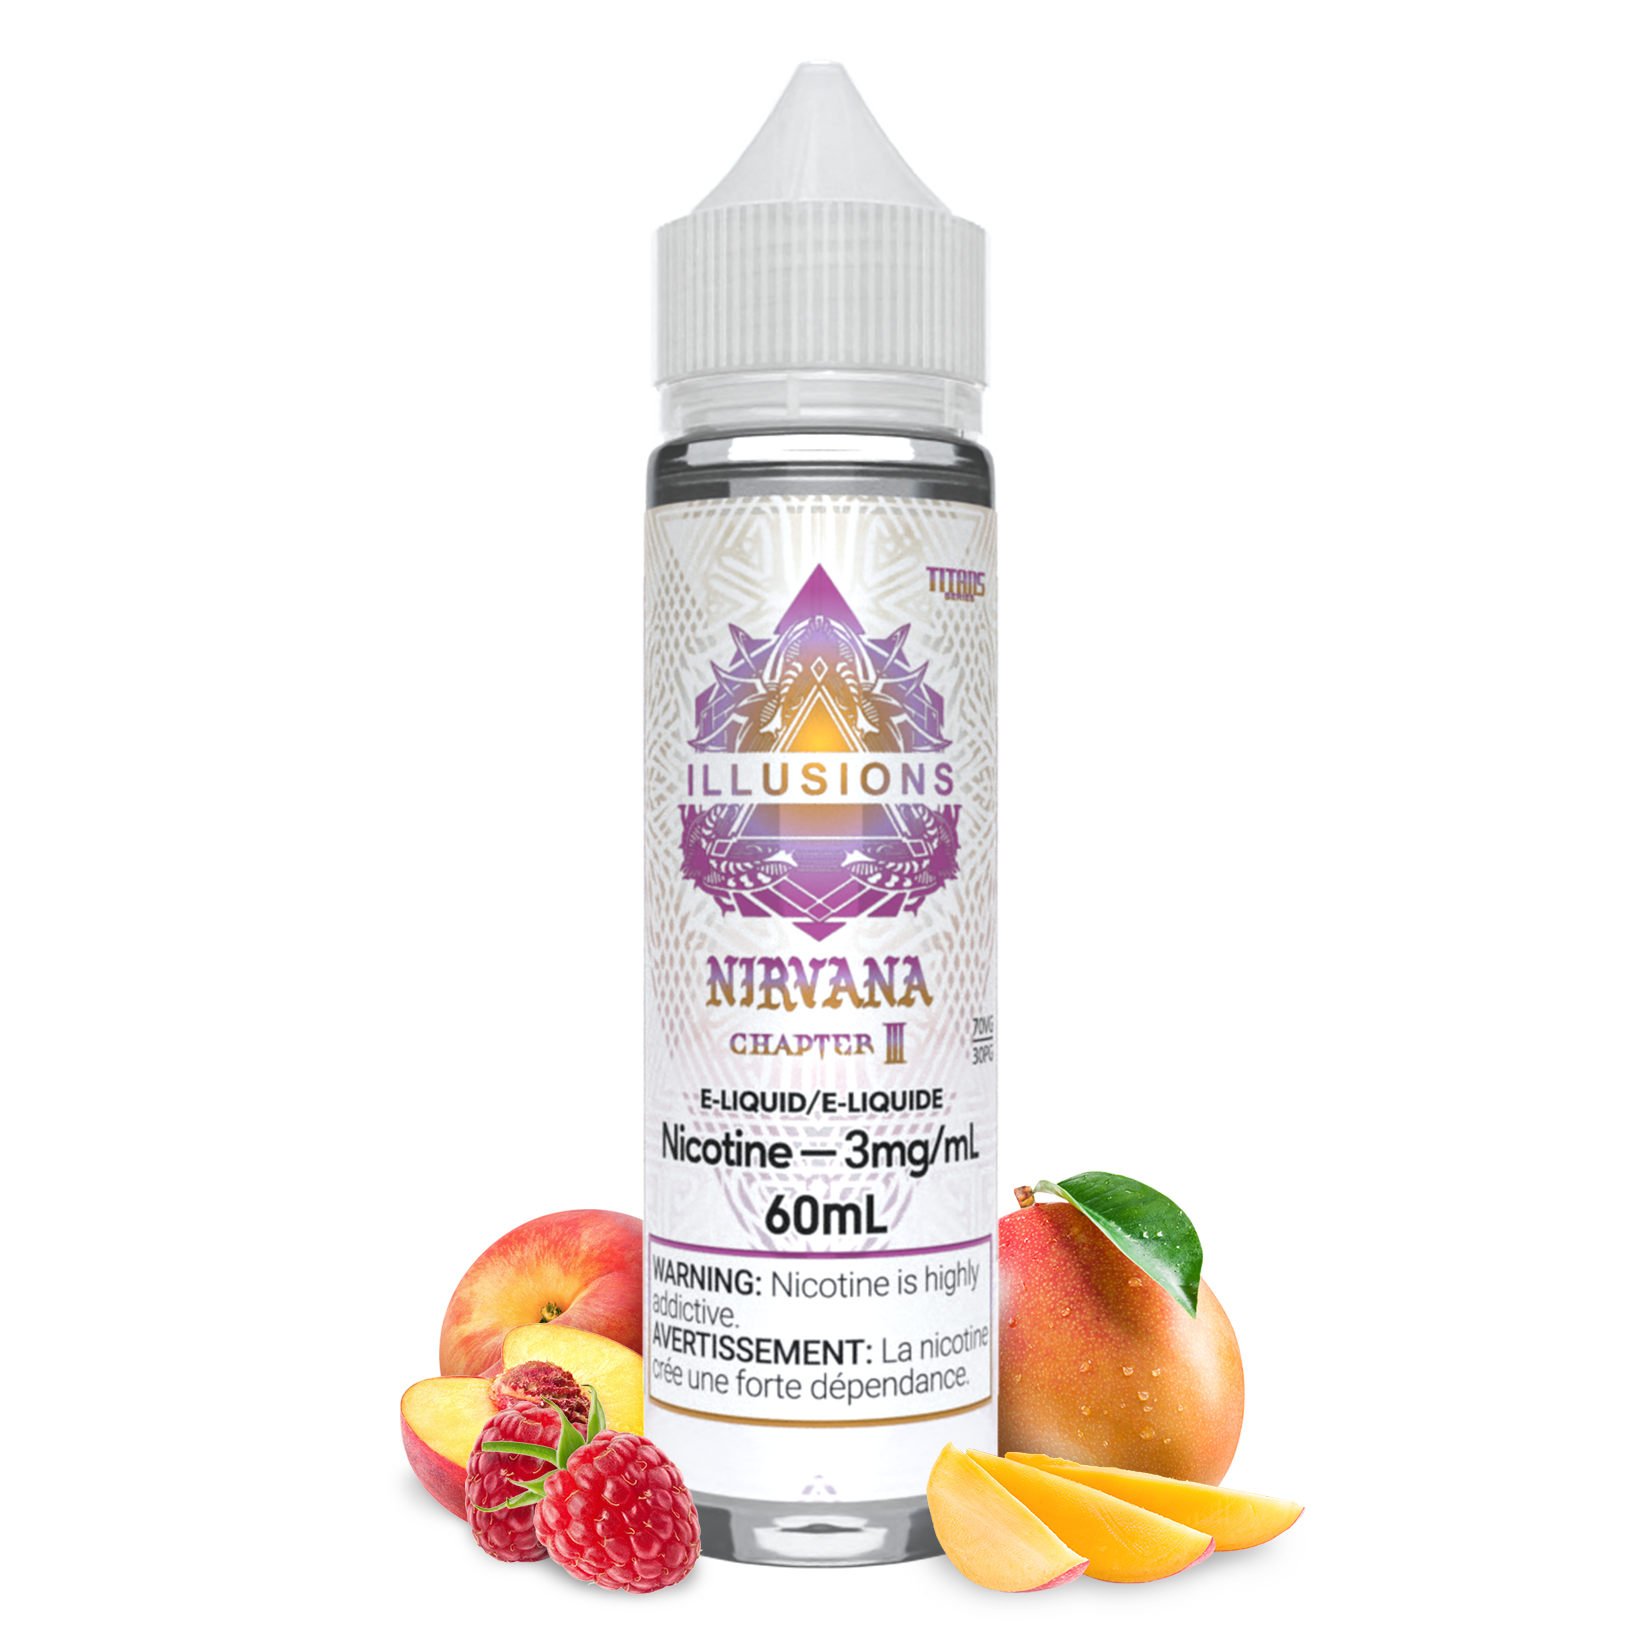 a 60 mL bottle of Vape E-liquid, NIrvana from chapter 3 by Illusions Vapor, this vape juice is available both in freebase variant and Nic Salt